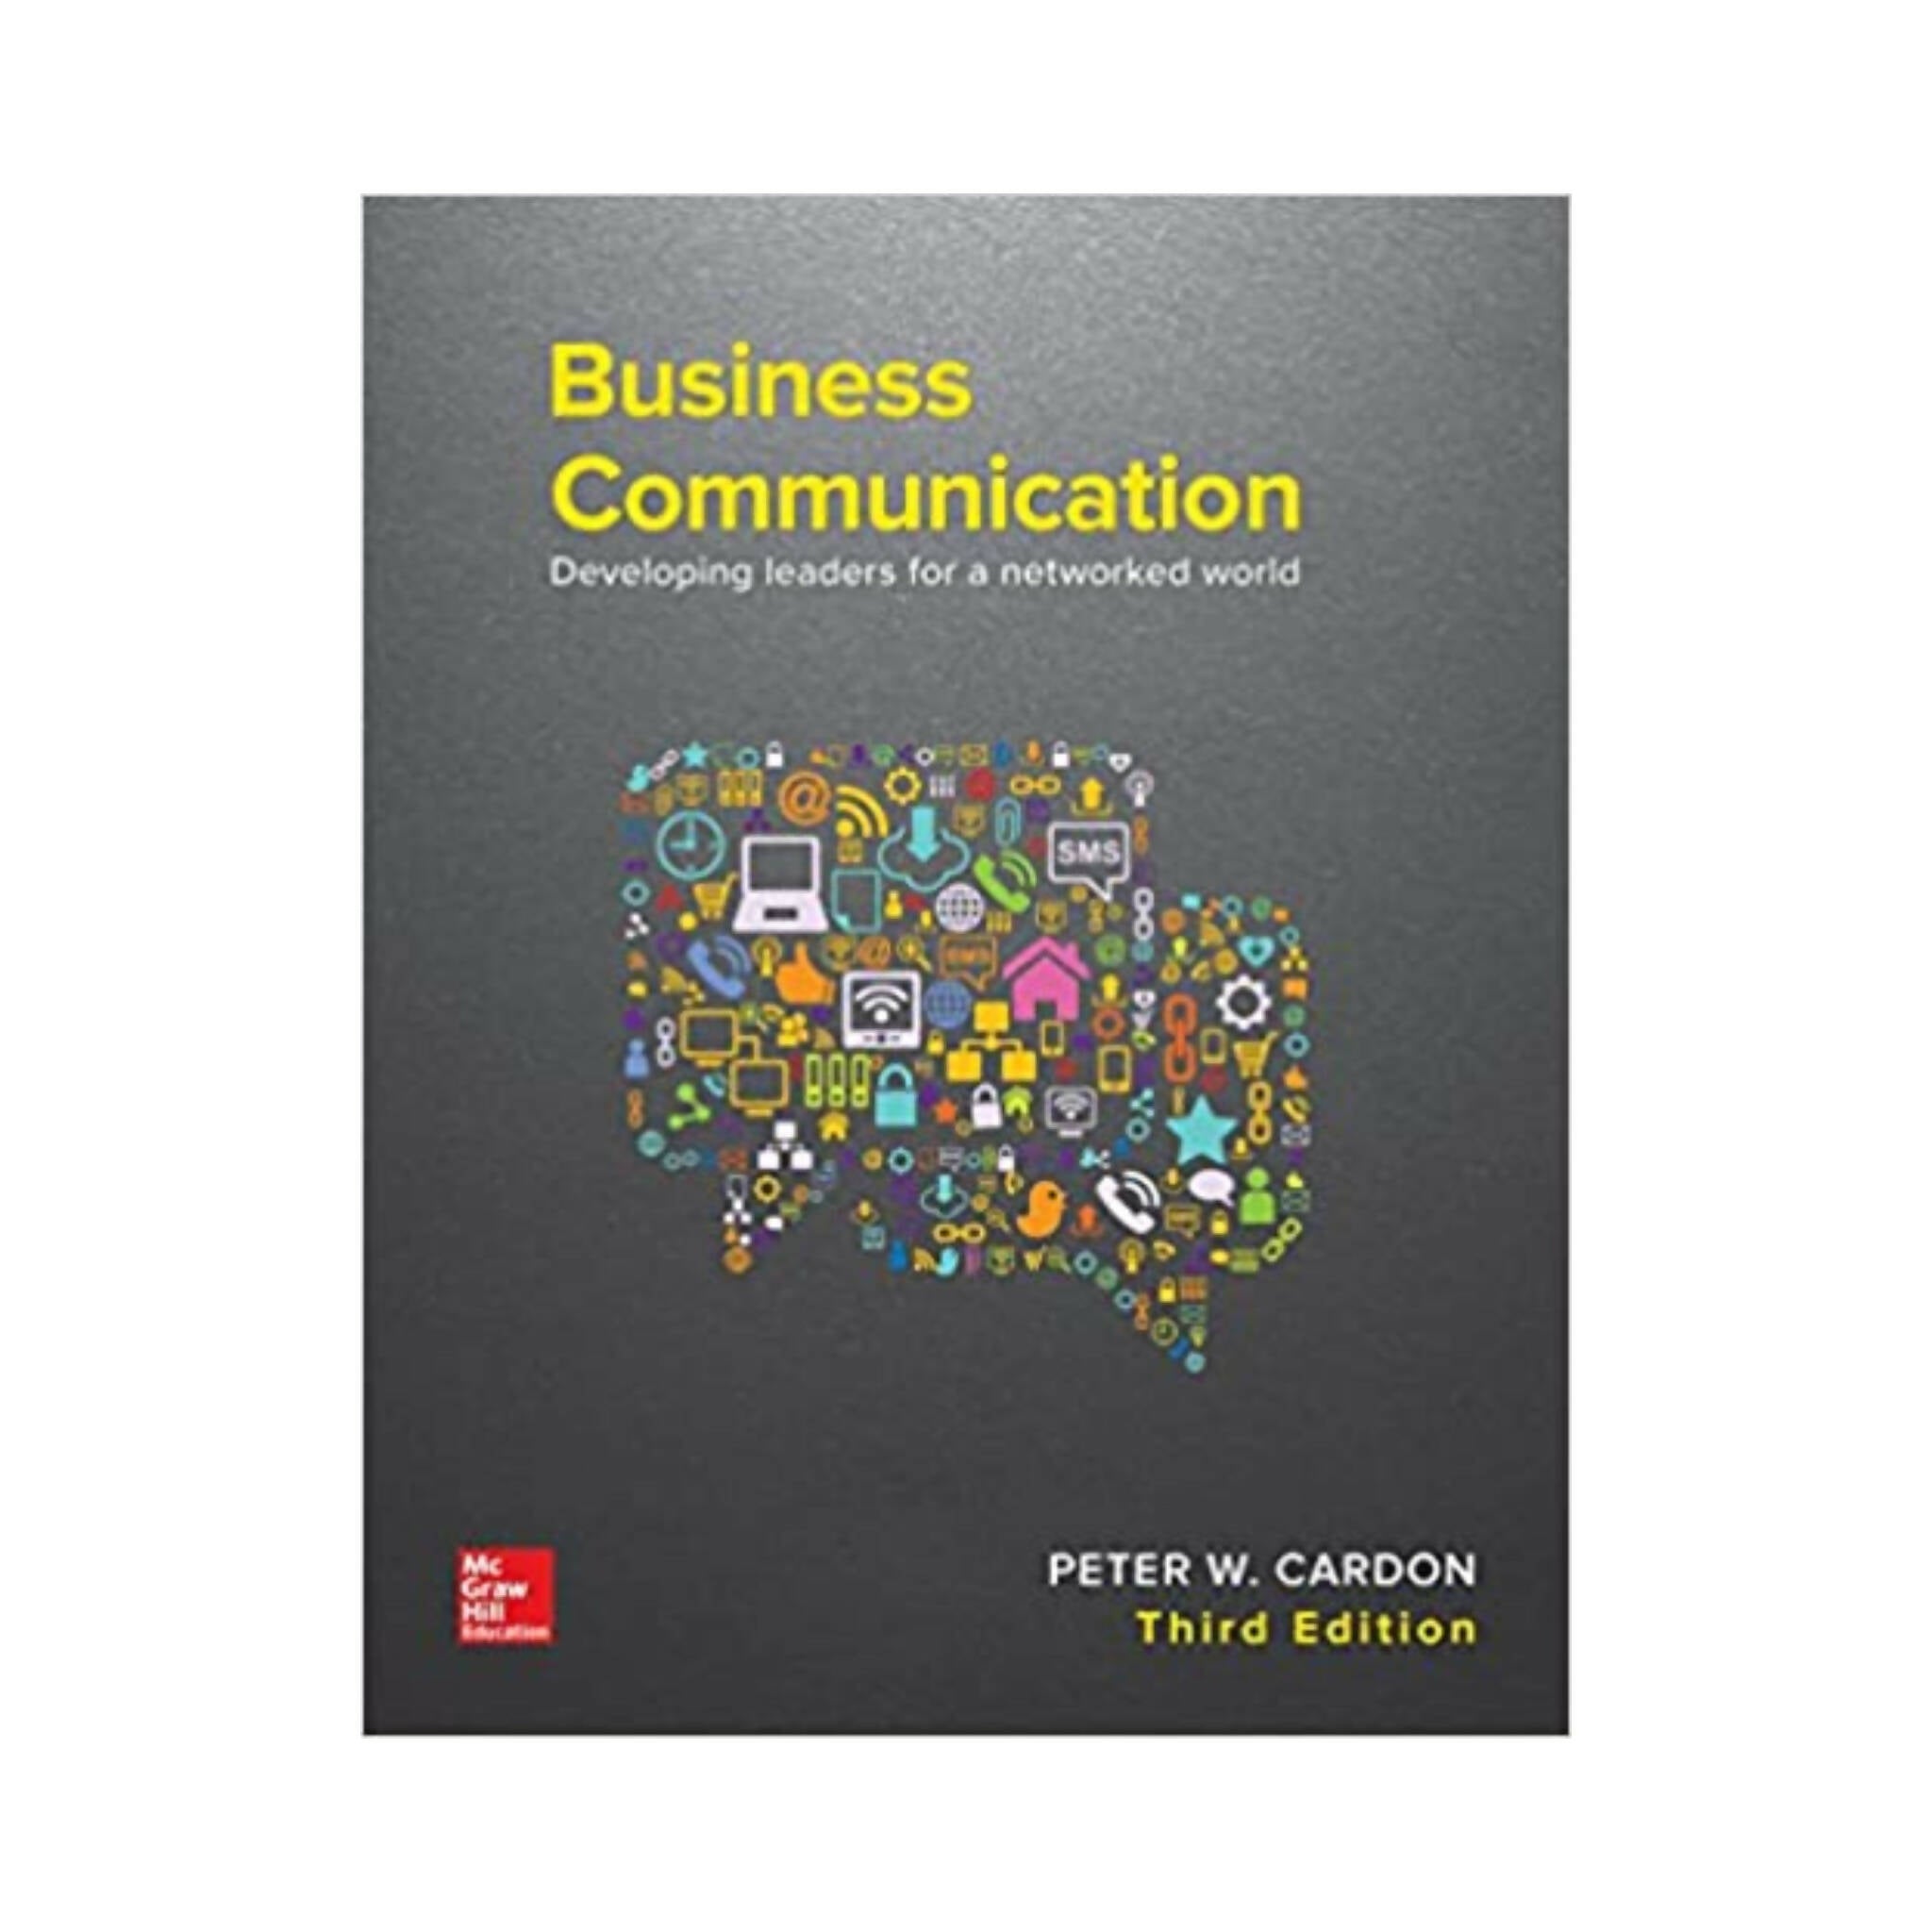 Book, Business Communication, Developing Leaders for a Networked World